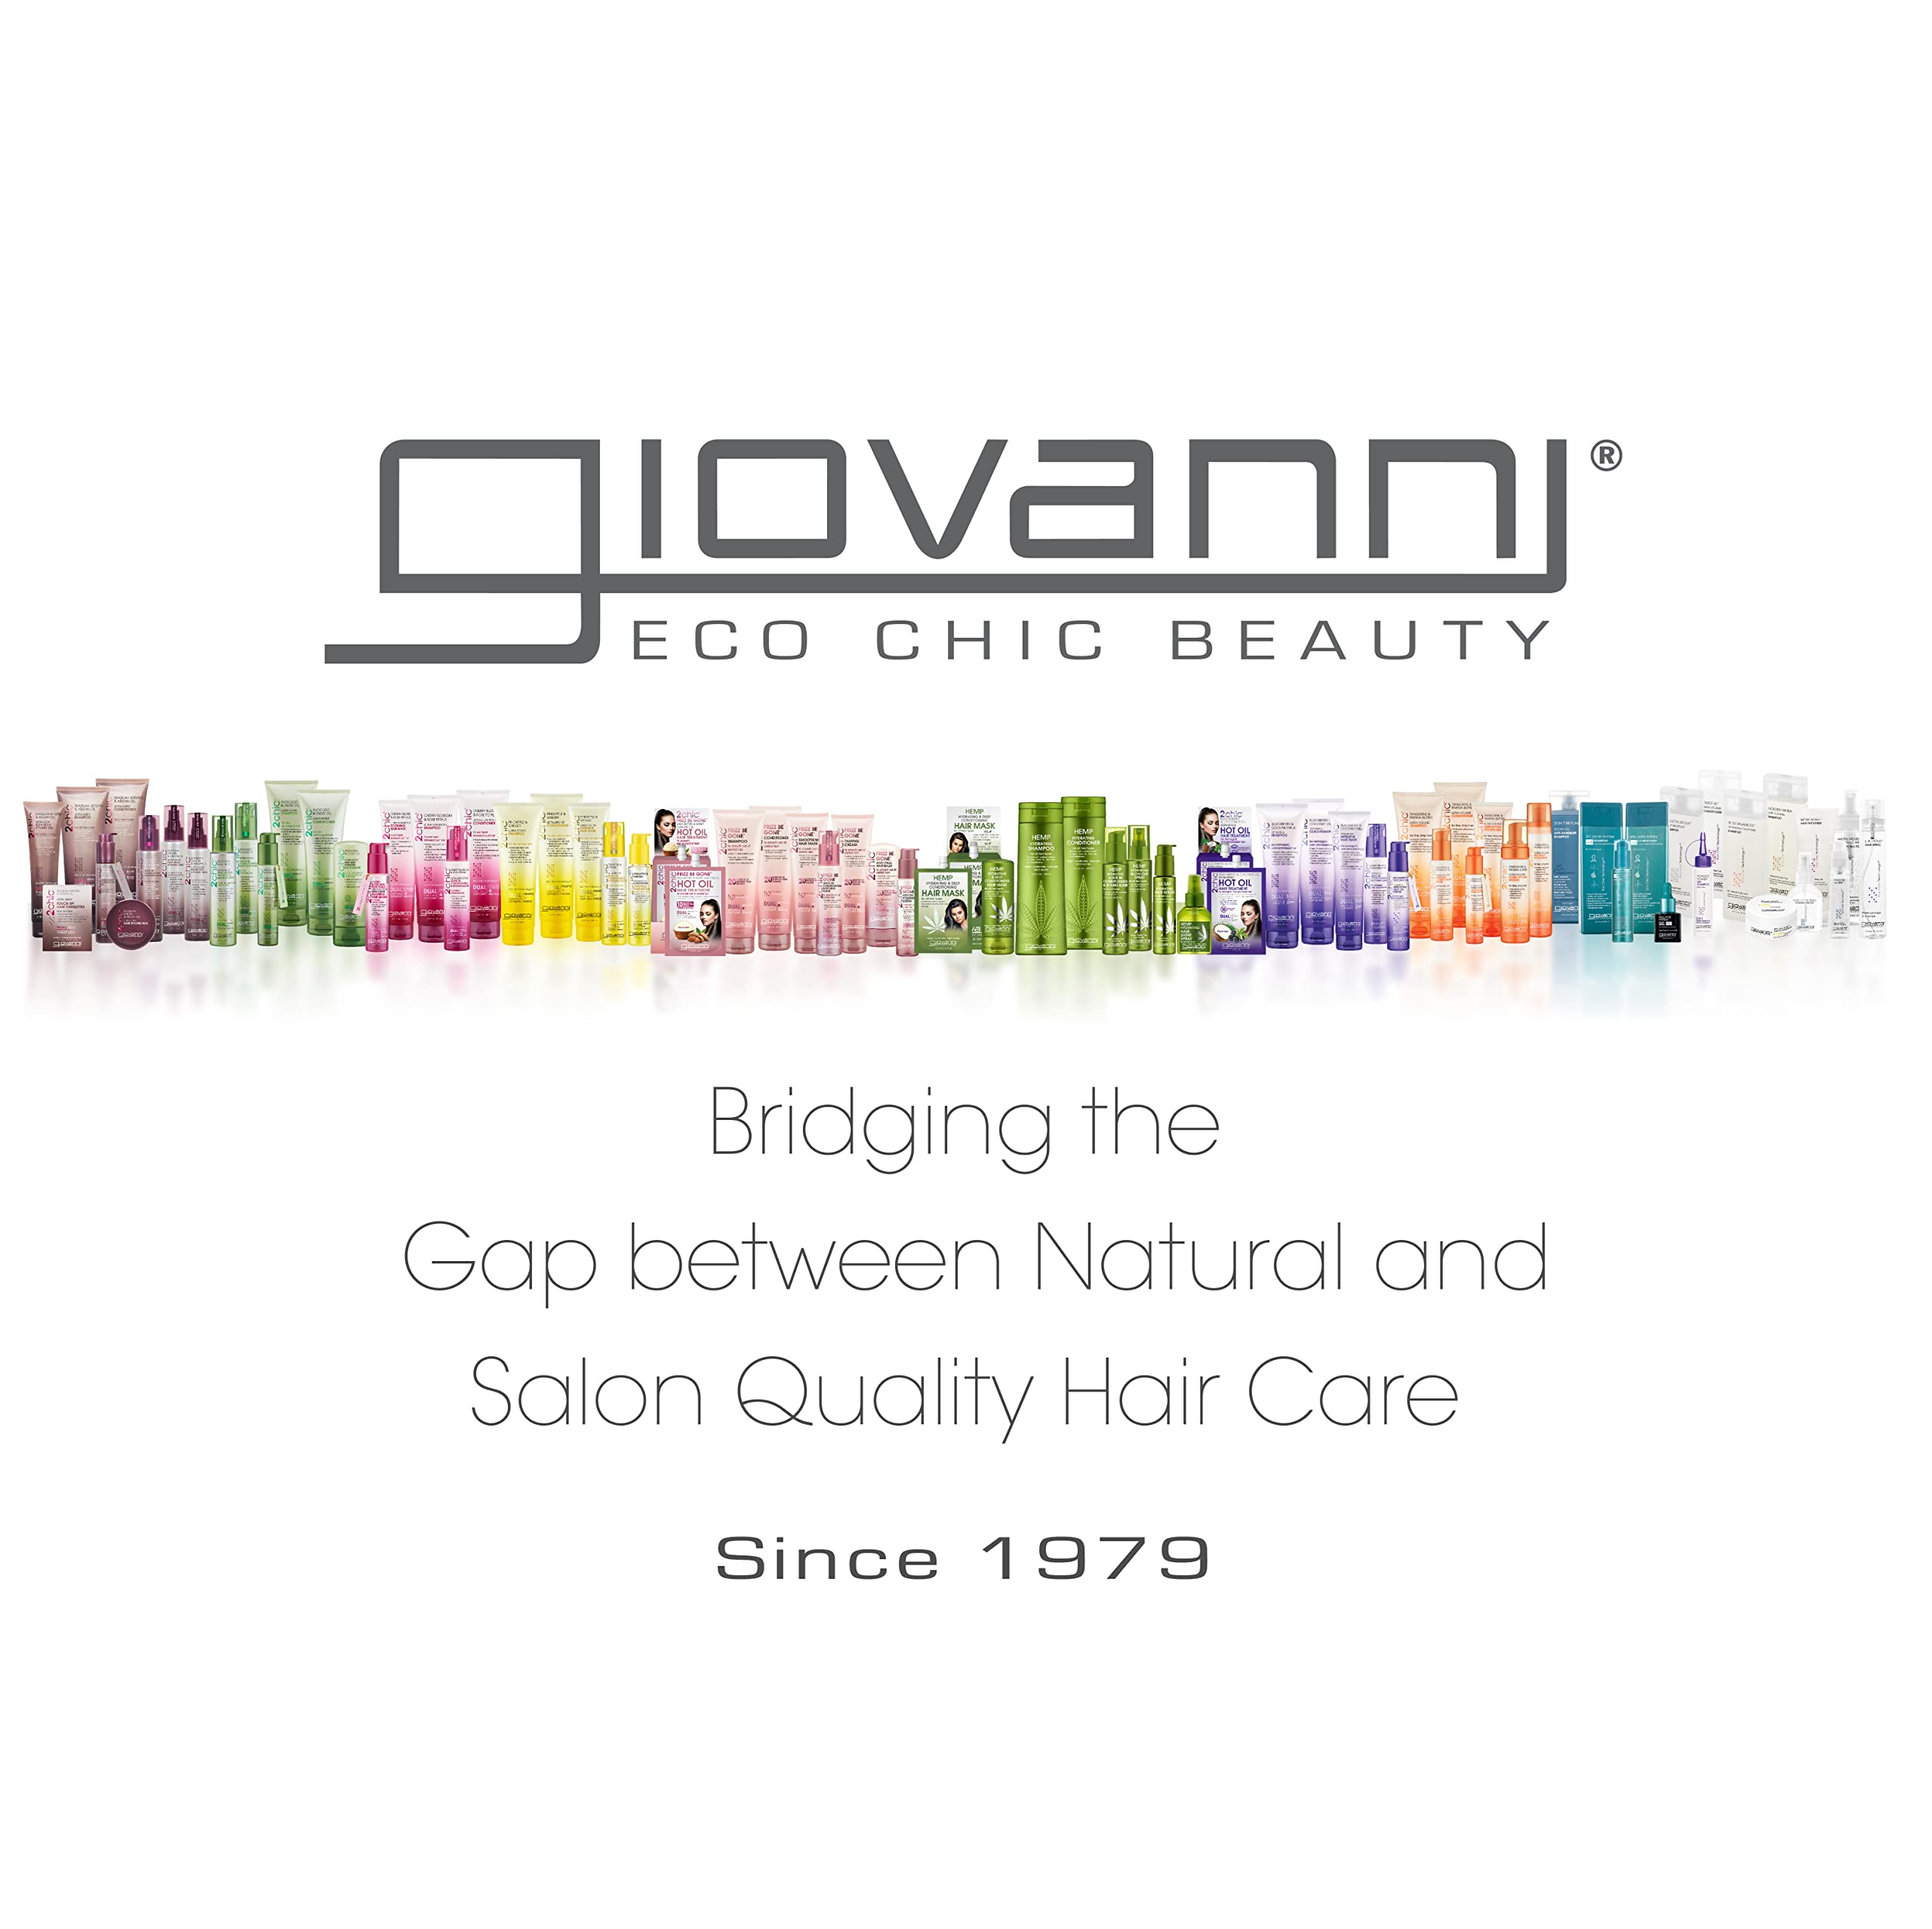 GIOVANNI Eco Chic 50:50 Balanced Hydrating Calming Conditioner, 8.5 oz. - Leaves Hair pH Balanced for Over-Processed, Lauryl & Laureth Lauryl & Laureth Sulfate Free, No Parabens, Color Safe